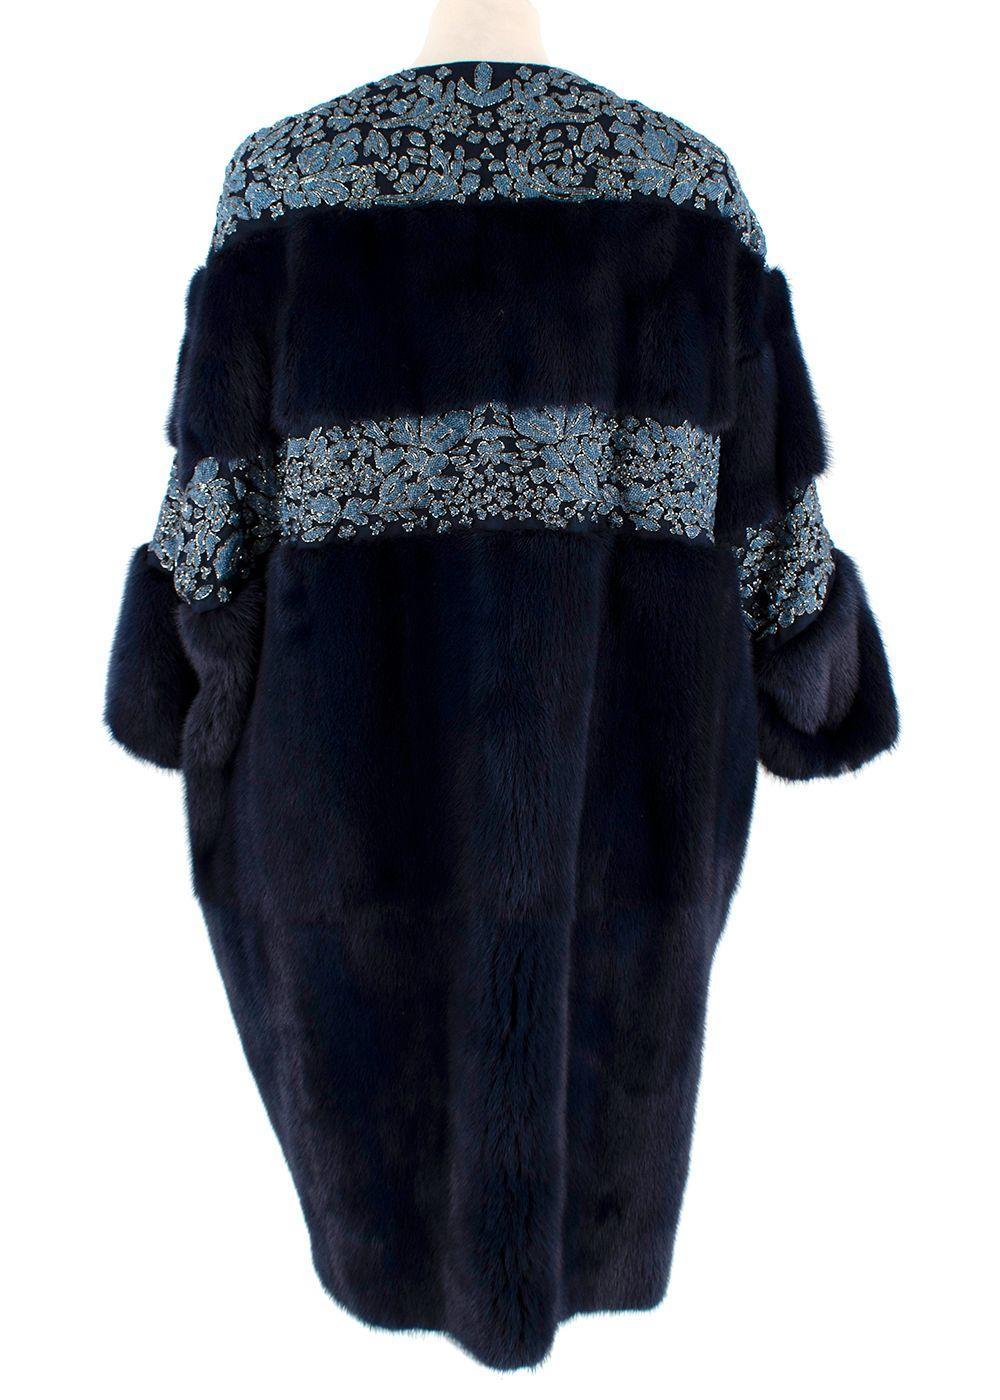 Valentino Runway Navy Floral Sequin Panelled Mink Fur Coat 2022

-Navy mink fur body 
-Bead leaf embellishment panels 
-Mid-weight construction 
-Fully lined, silk lining 
-Snap button fastening 
-Balloon sleeves 
-Round collar 

Material: 

Mink